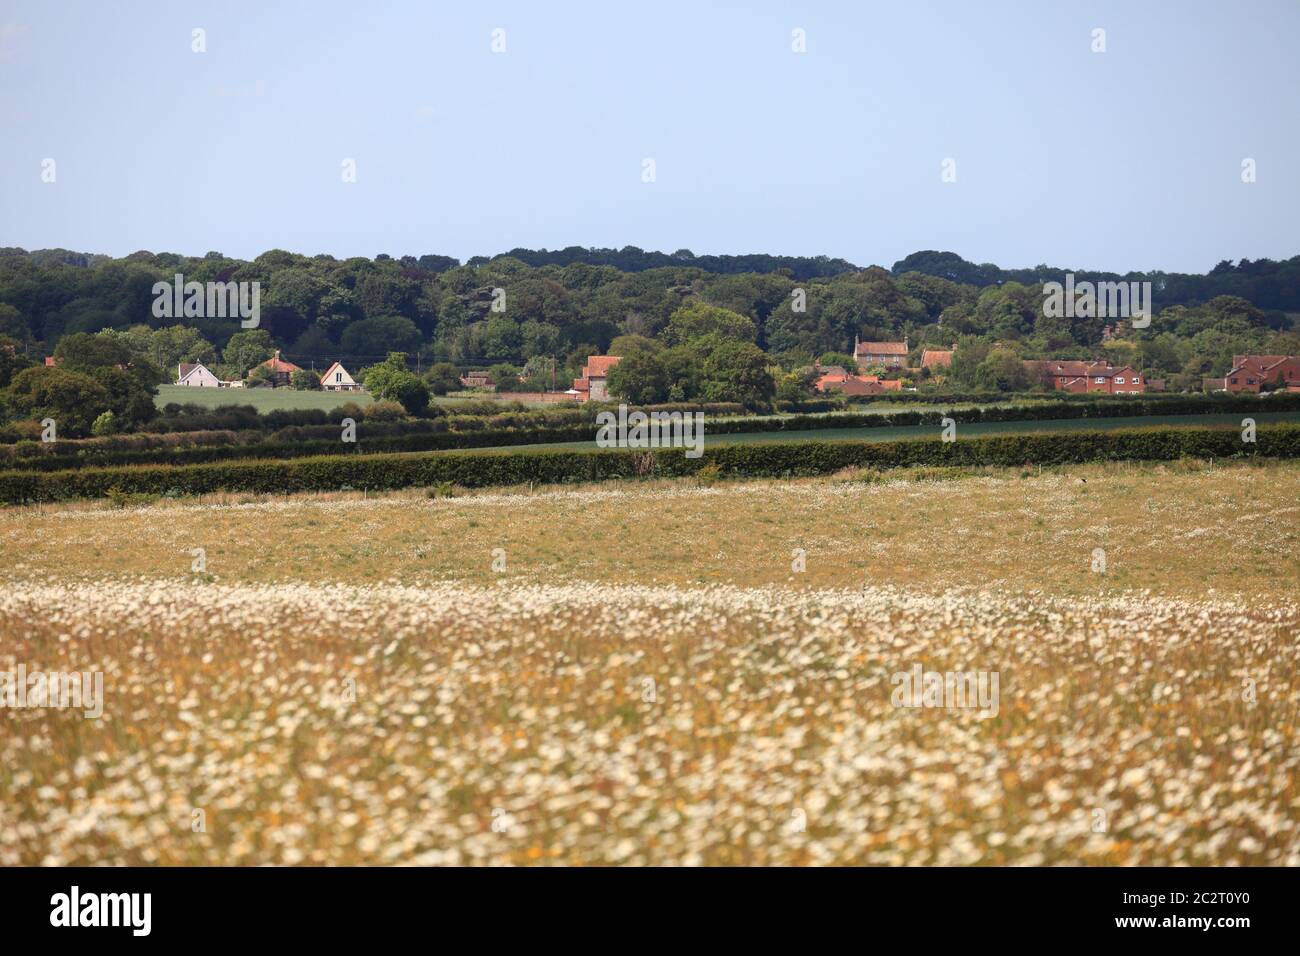 The village of Ringstead seen across a field of wild flowers. Stock Photo